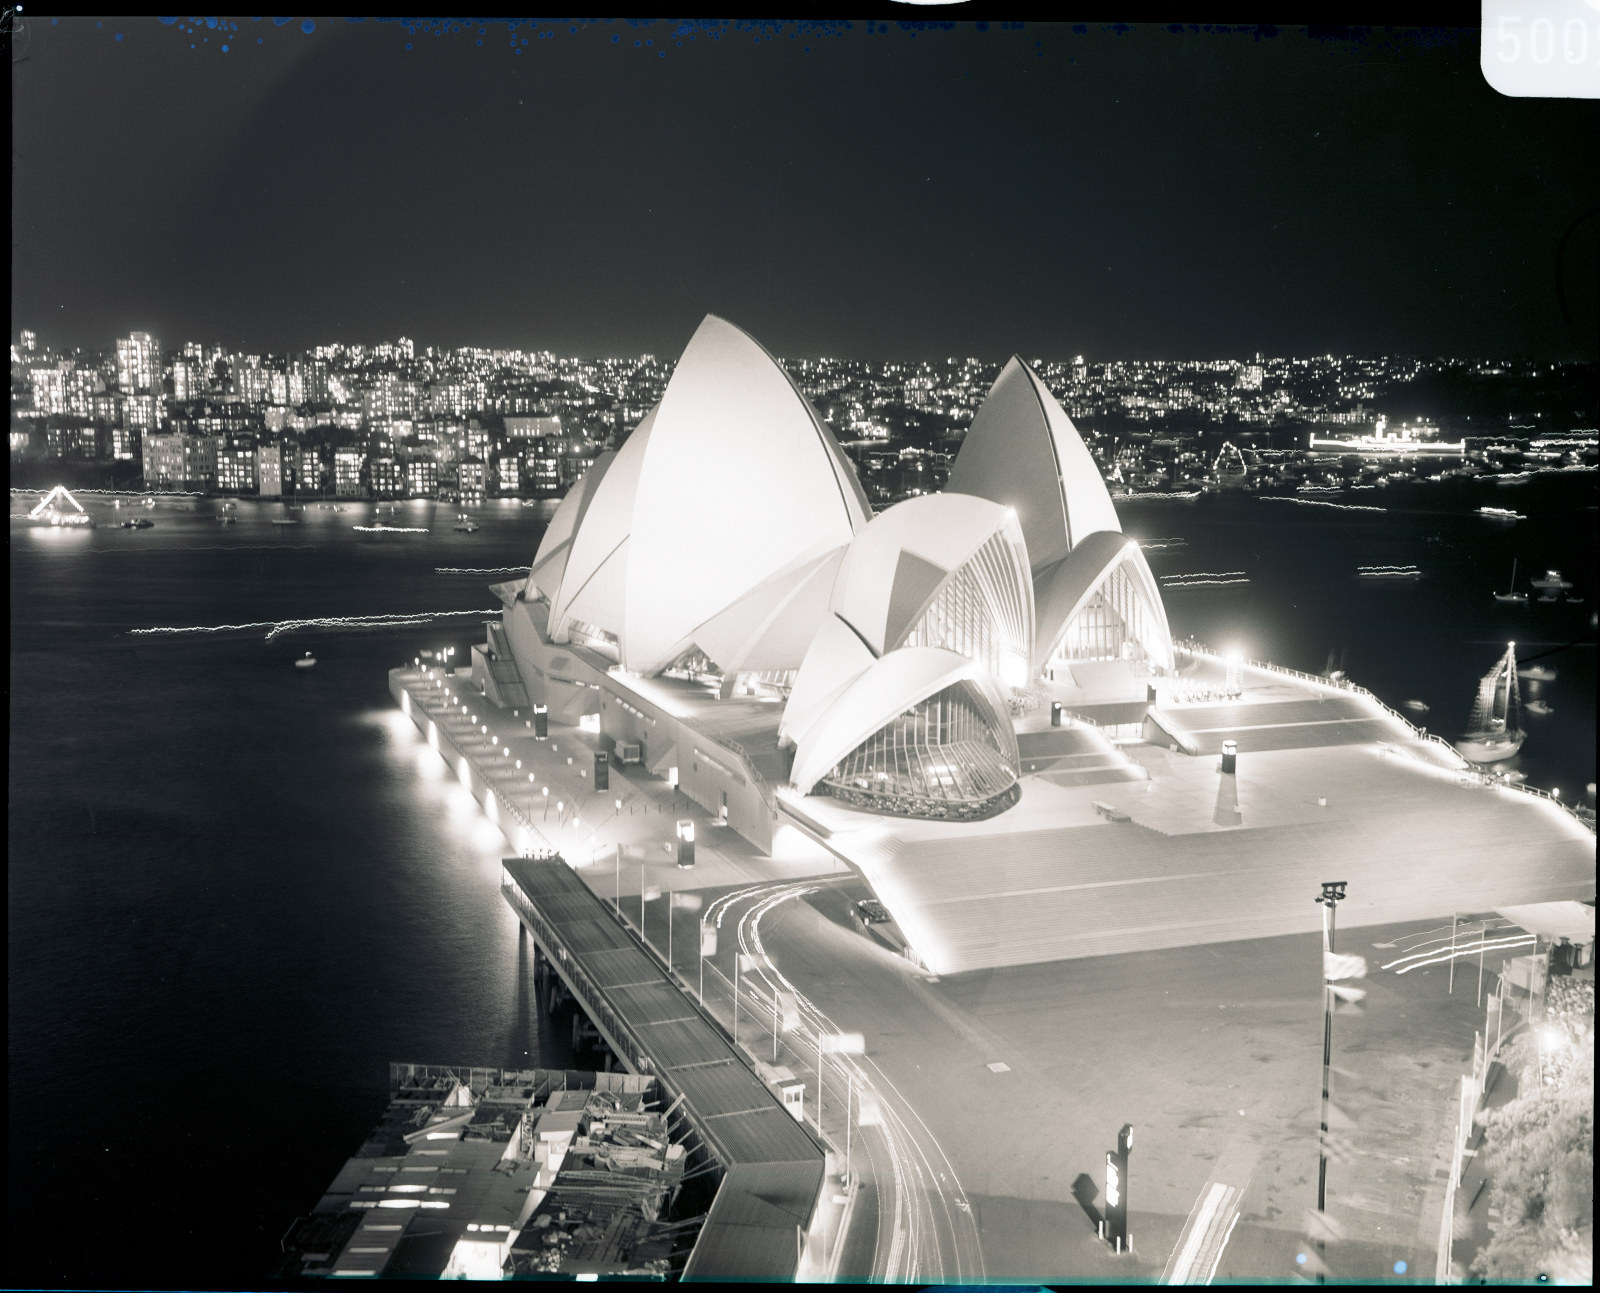 Government Printing Office 2 - 50097 - City decorations for opening of Opera House [Government Printer; Sydney Opera House (N.S.W.); decorations (festive); official events] [GPO original locations or series - St91244] [Oct-73]